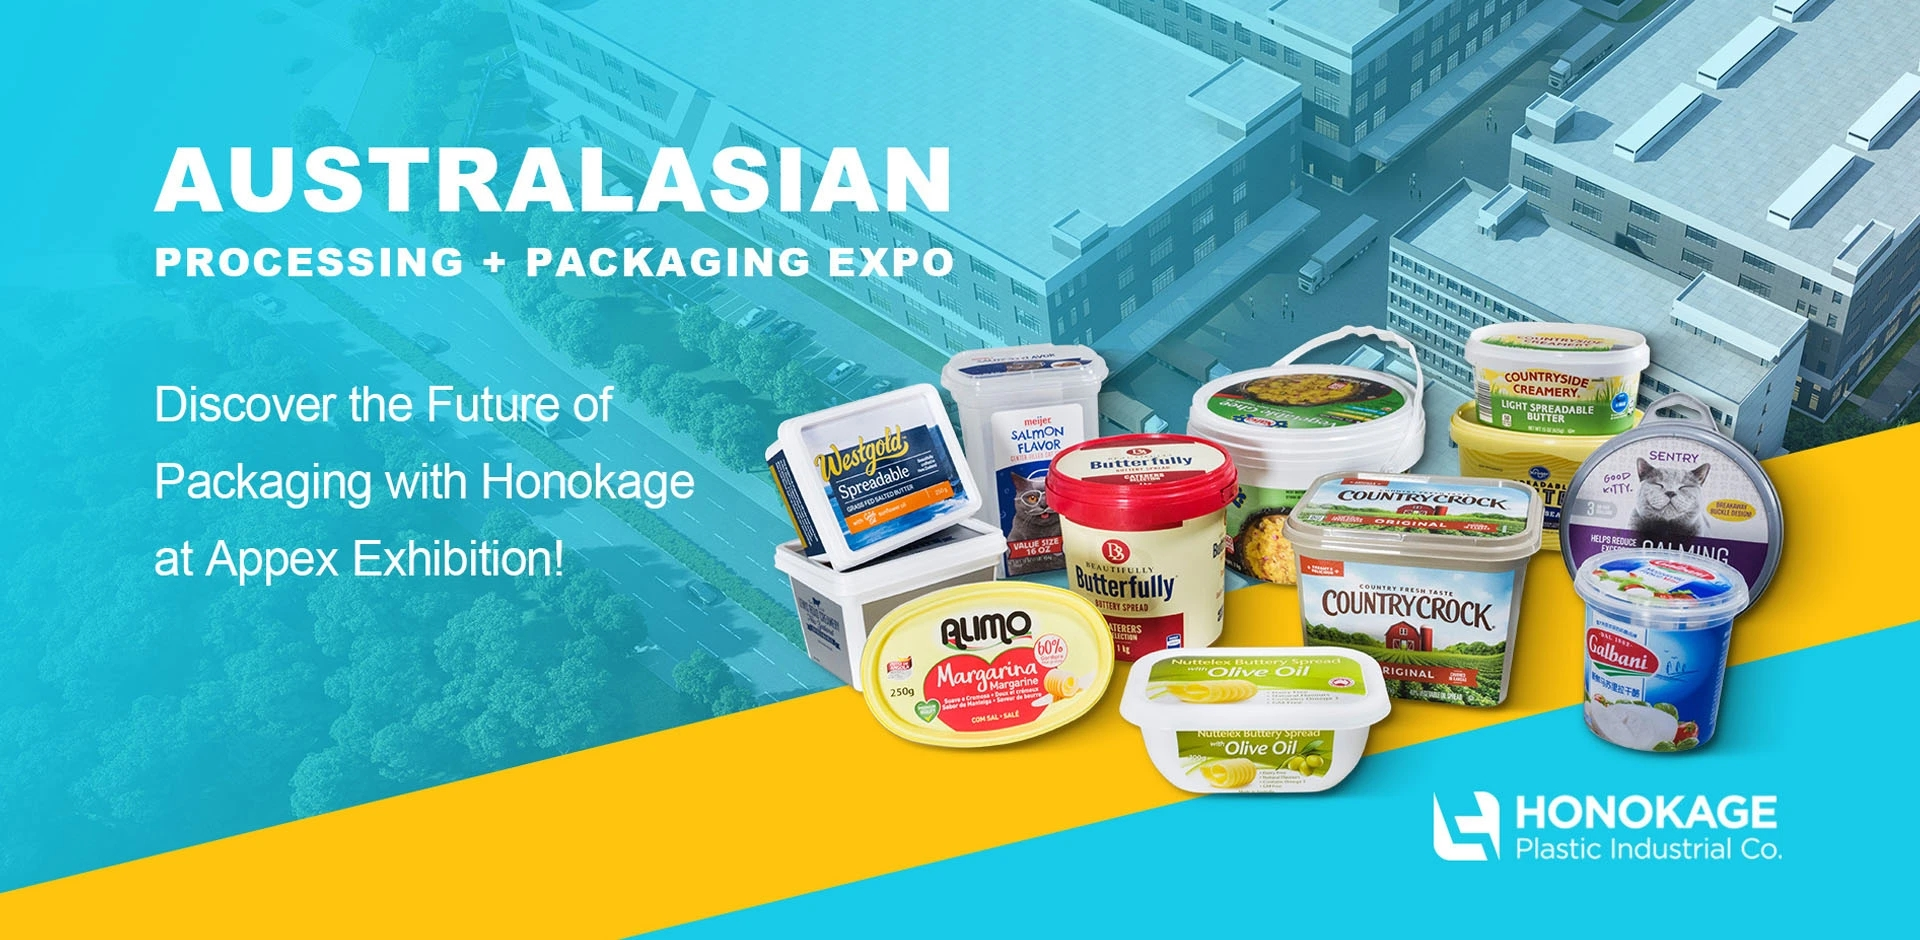 Discover the Future of Packaging with Honokage at Appex Exhibitiion!